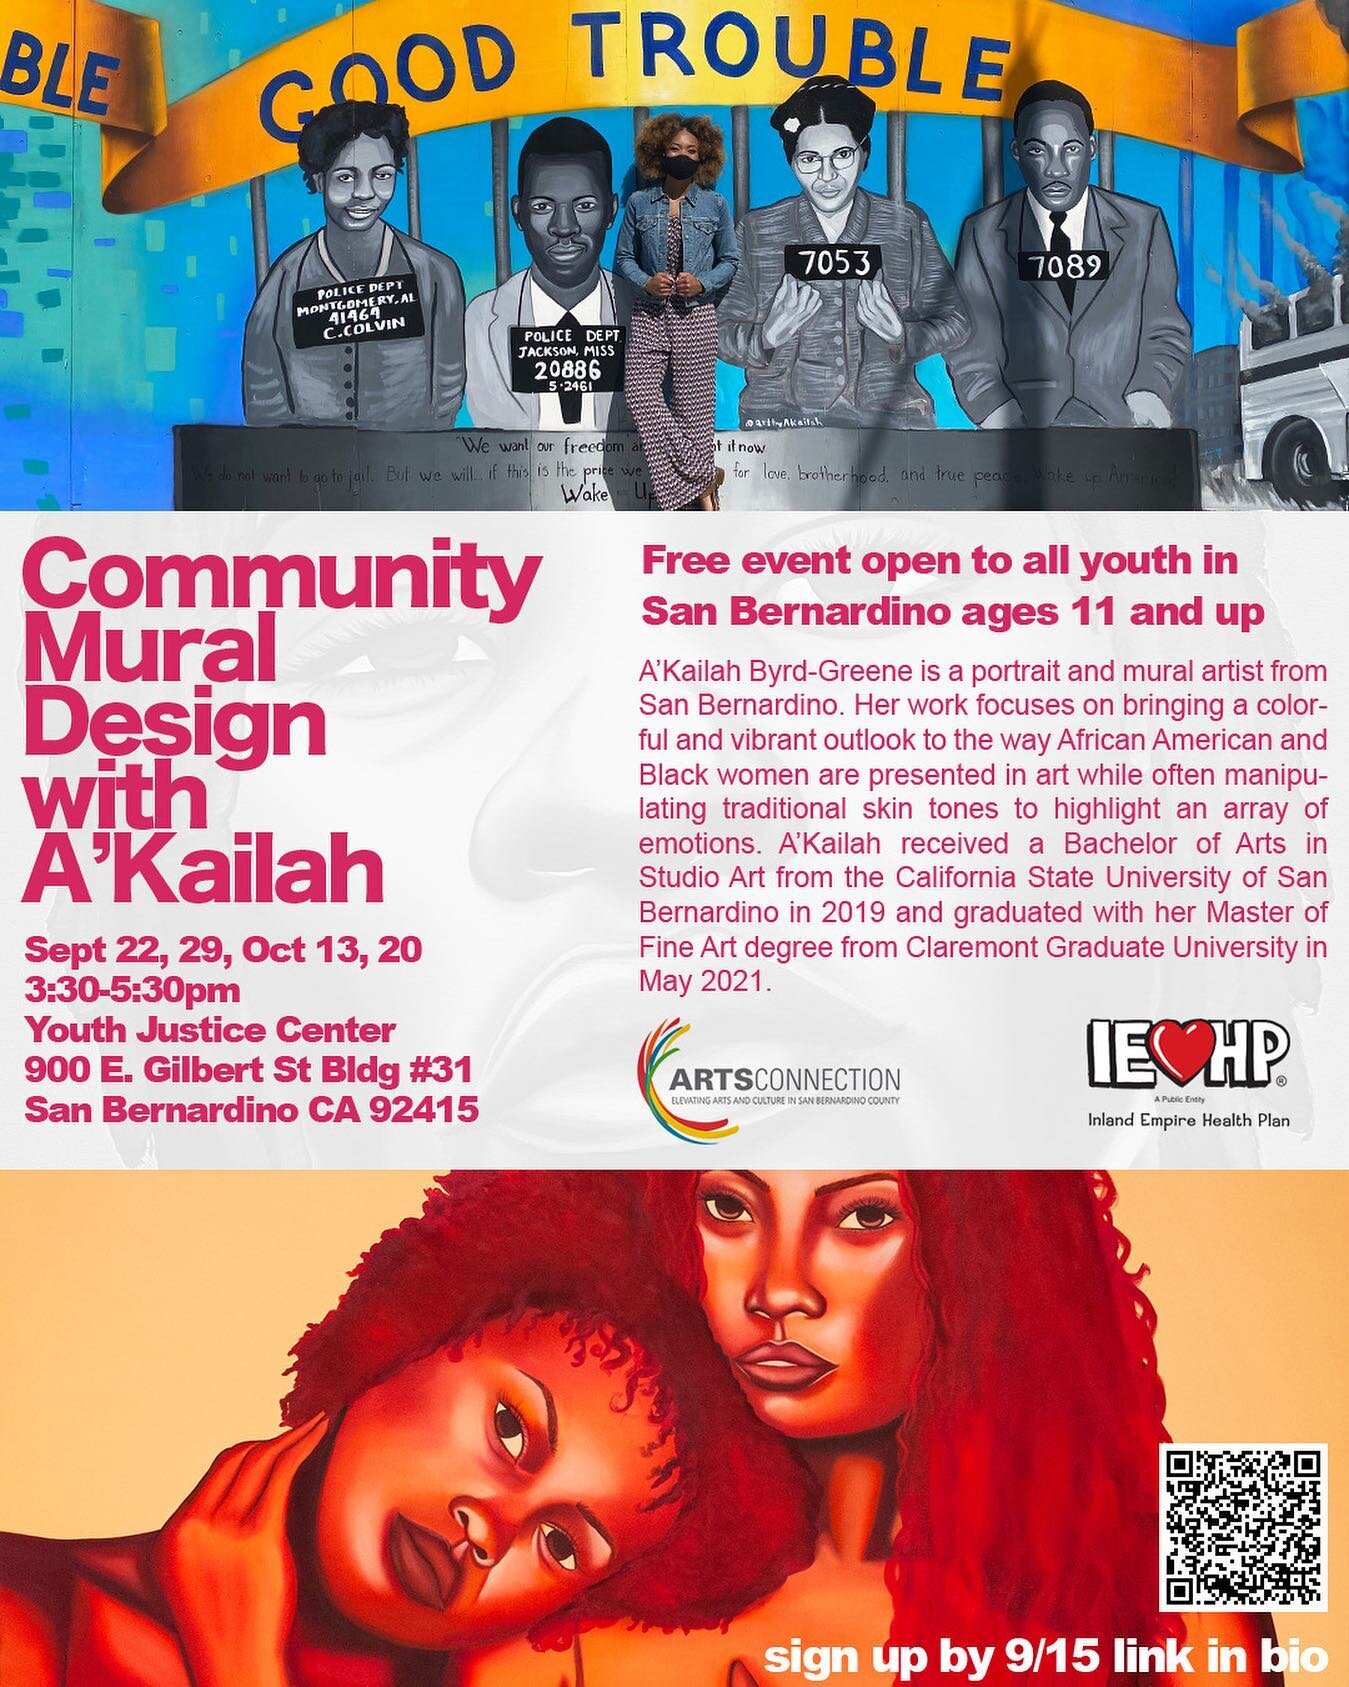 In a couple weeks I&rsquo;ll be teaching free workshops on community mural design for youth ages 11 and up in San Bernardino! ✨

Register using the link in my bio! 

#community #youthjustice #muraldesign #sanbernardino #artist #muralart